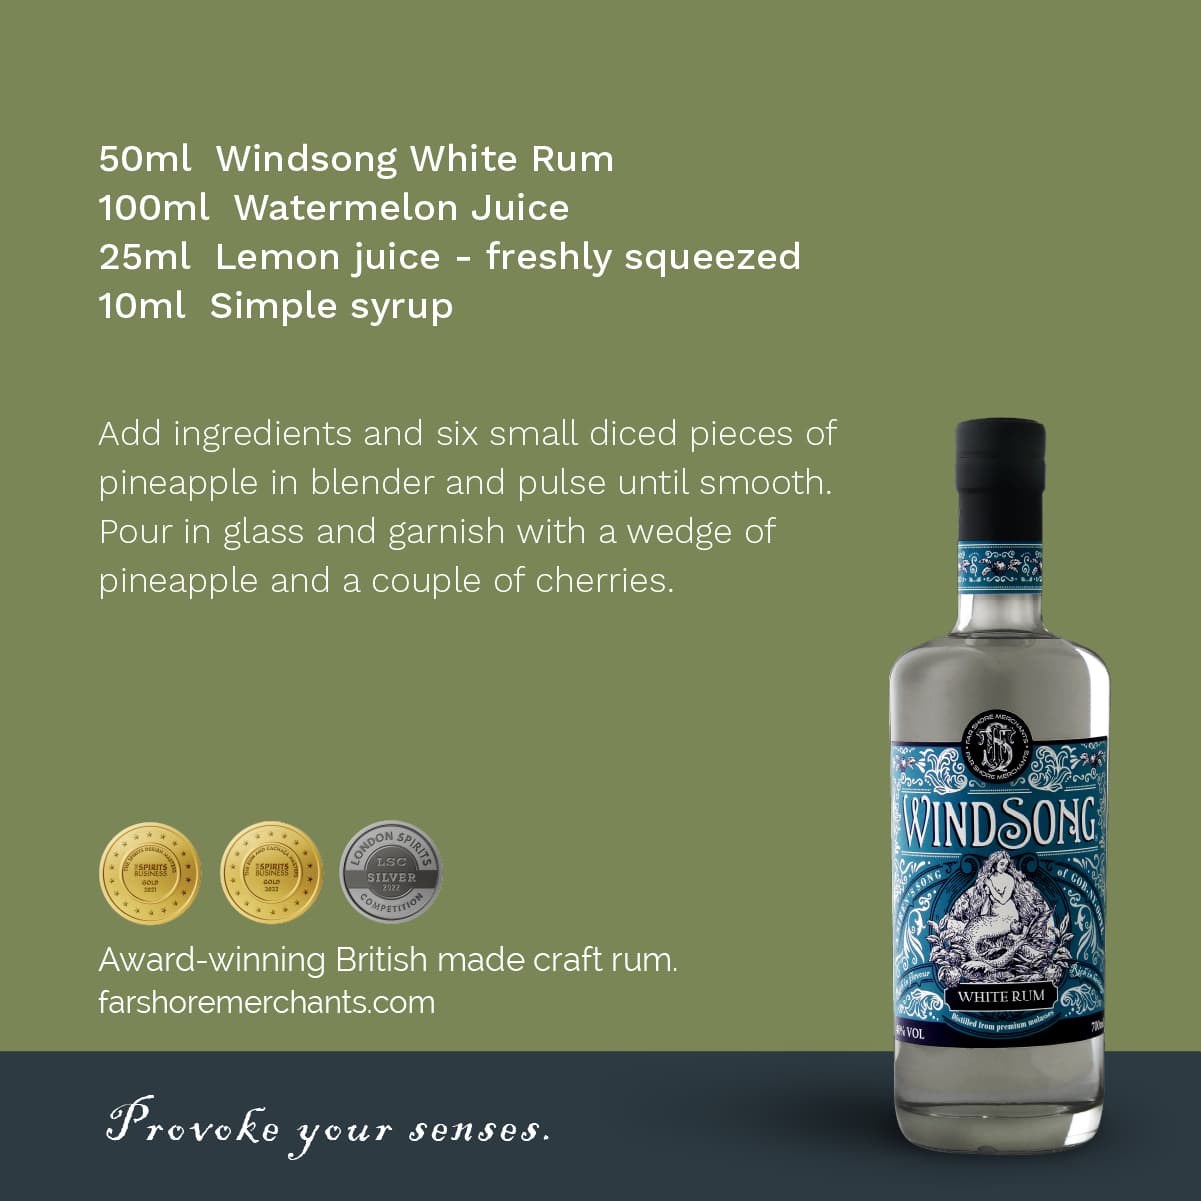 Windsong Rumcoco Groove cocktail recipe